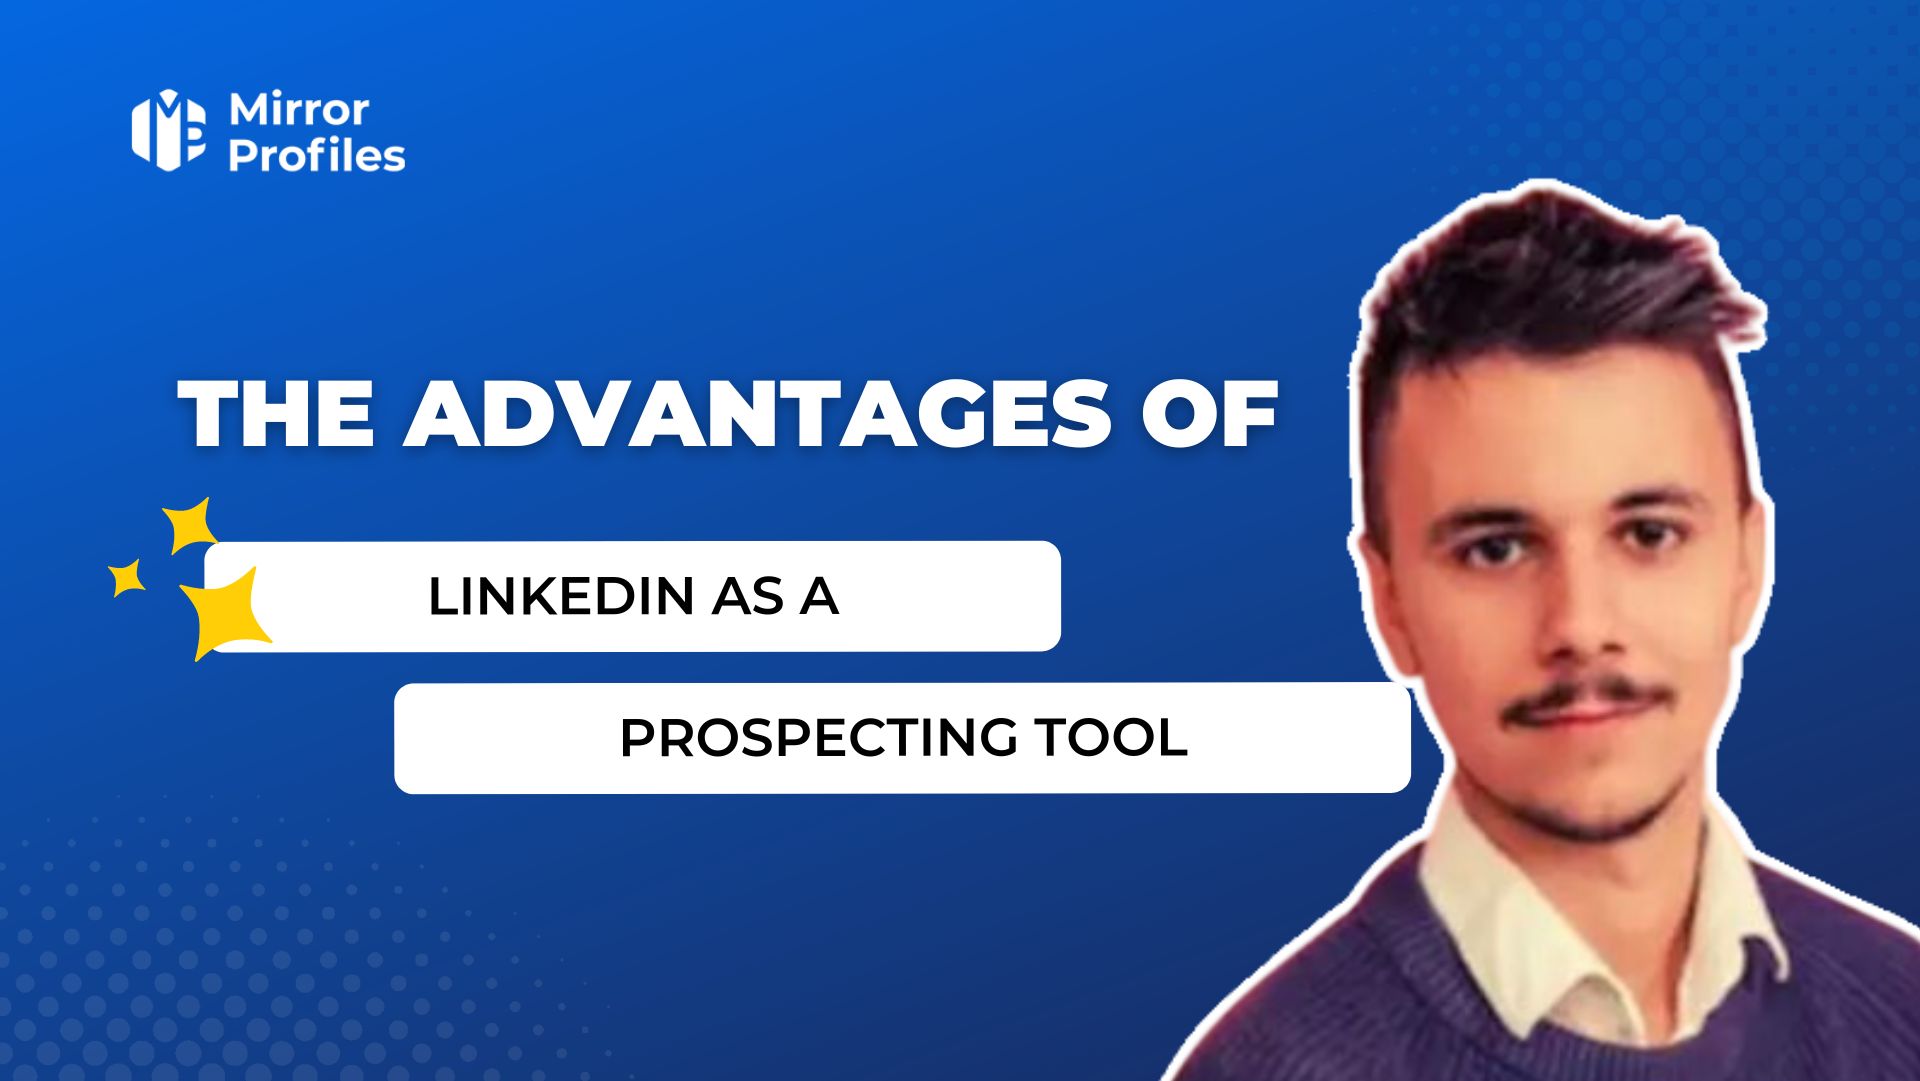 The advantages of LinkedIn as a prospecting tool